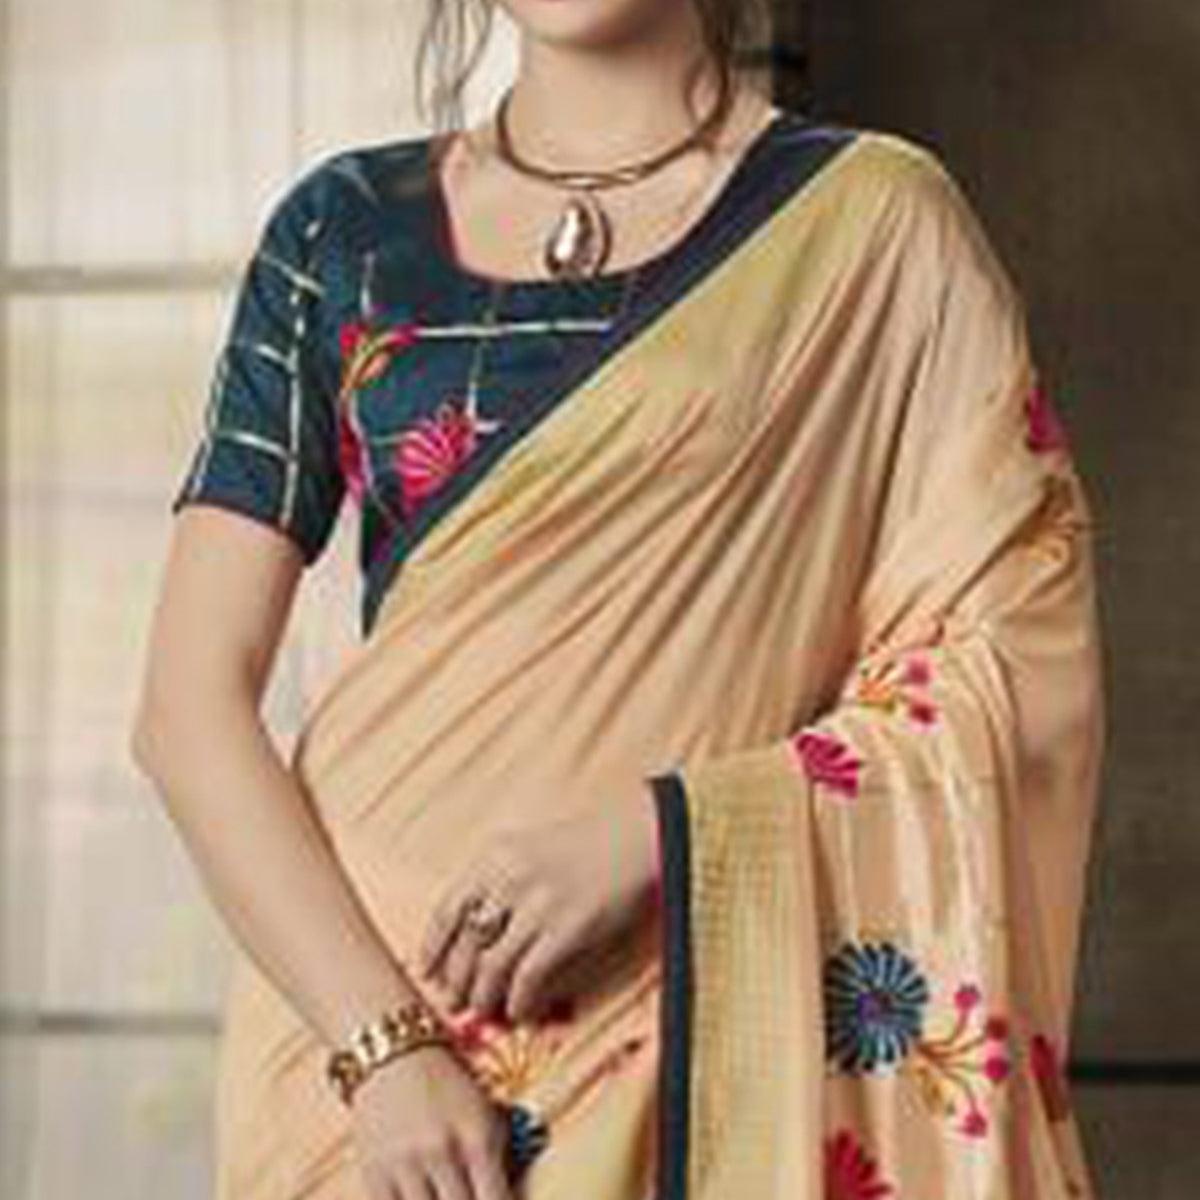 Blooming Beige Colored Partywear Embroidered Art Silk Saree - Peachmode